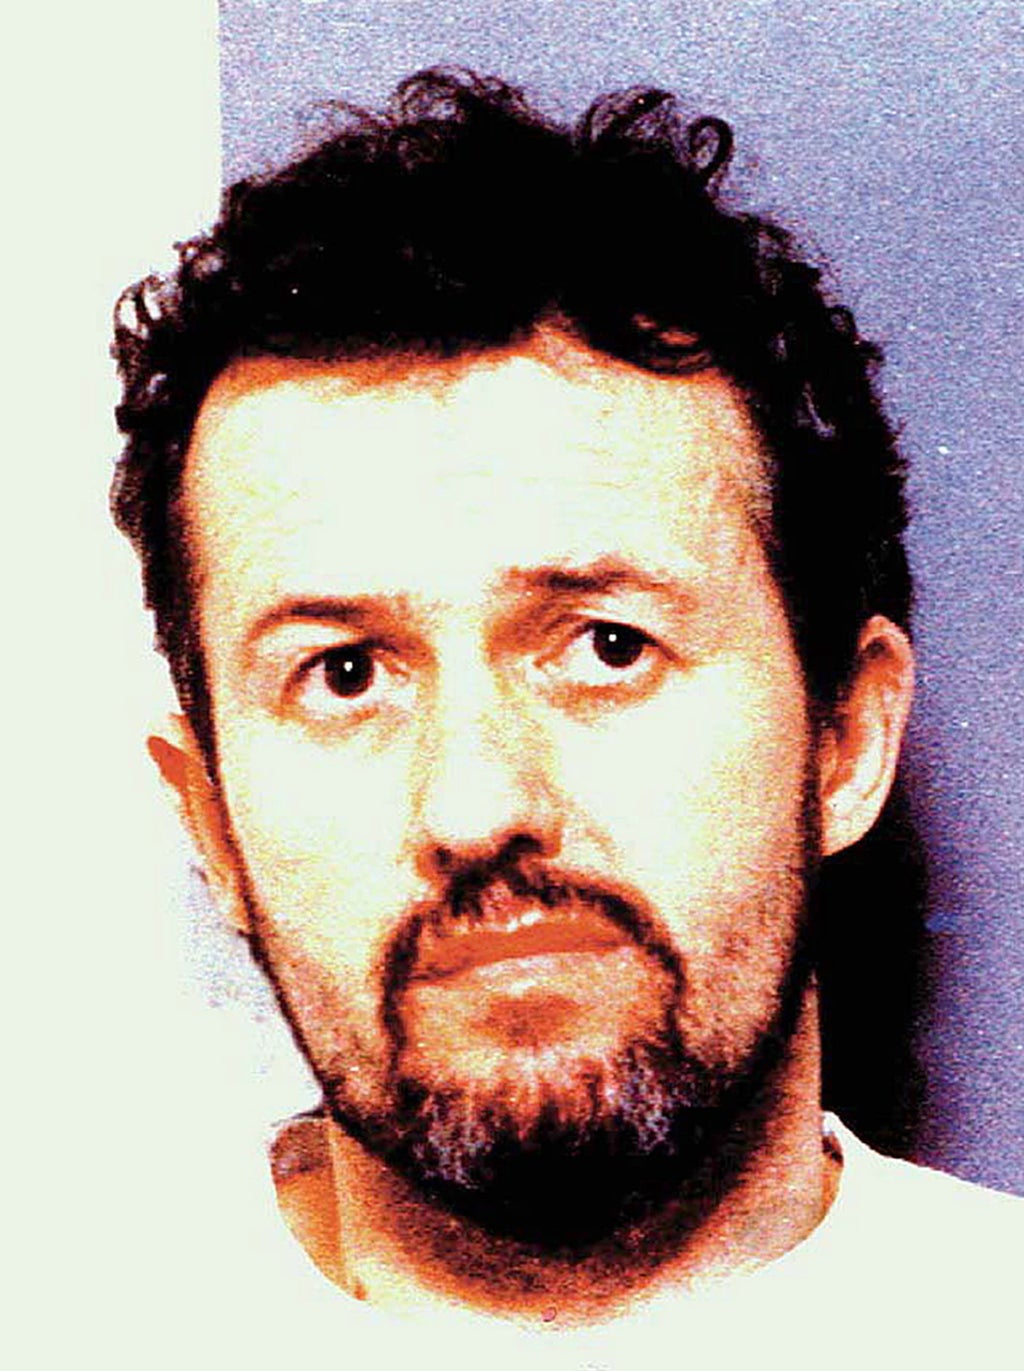 Men who sued Manchester City over Barry Bennell abuse claims wait for ruling